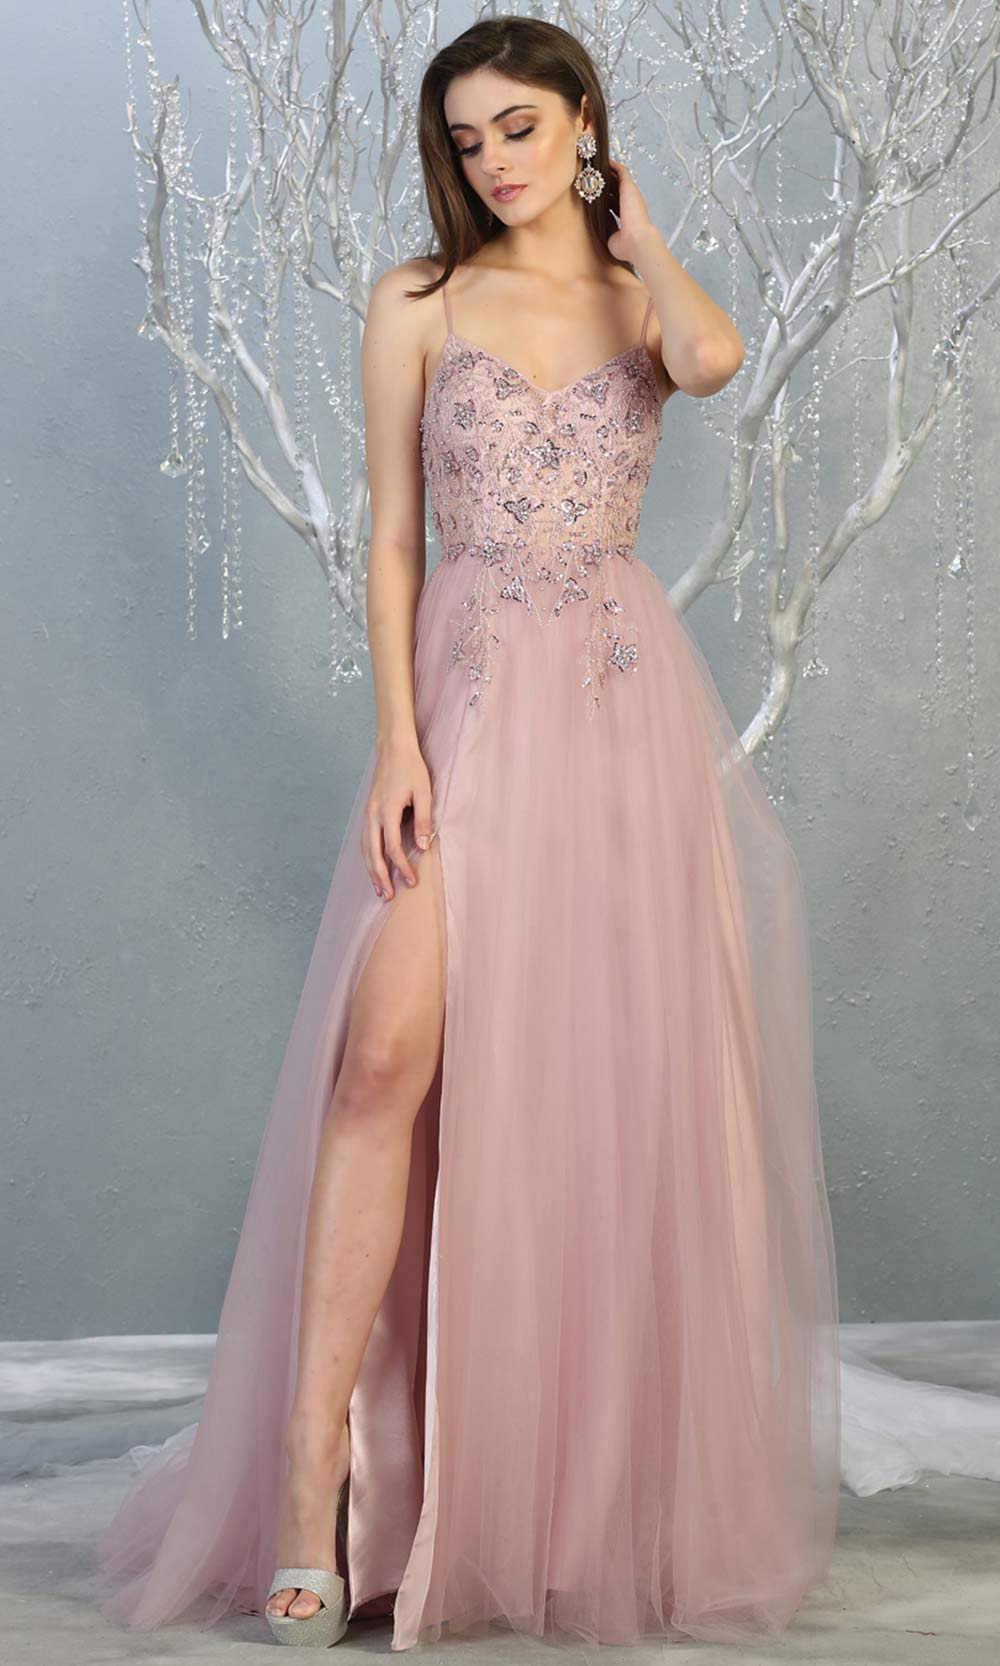 Mayqueen MQ1778 long mauve pink scoop neck flowy tulle skirt dress with high slit. Perfect for prom, engagement dress, e-shoot dress, formal wedding guest dress, debut, quinceanera, sweet 16, gala. Plus sizes avail in this dusty rose semi ballgown.jpg